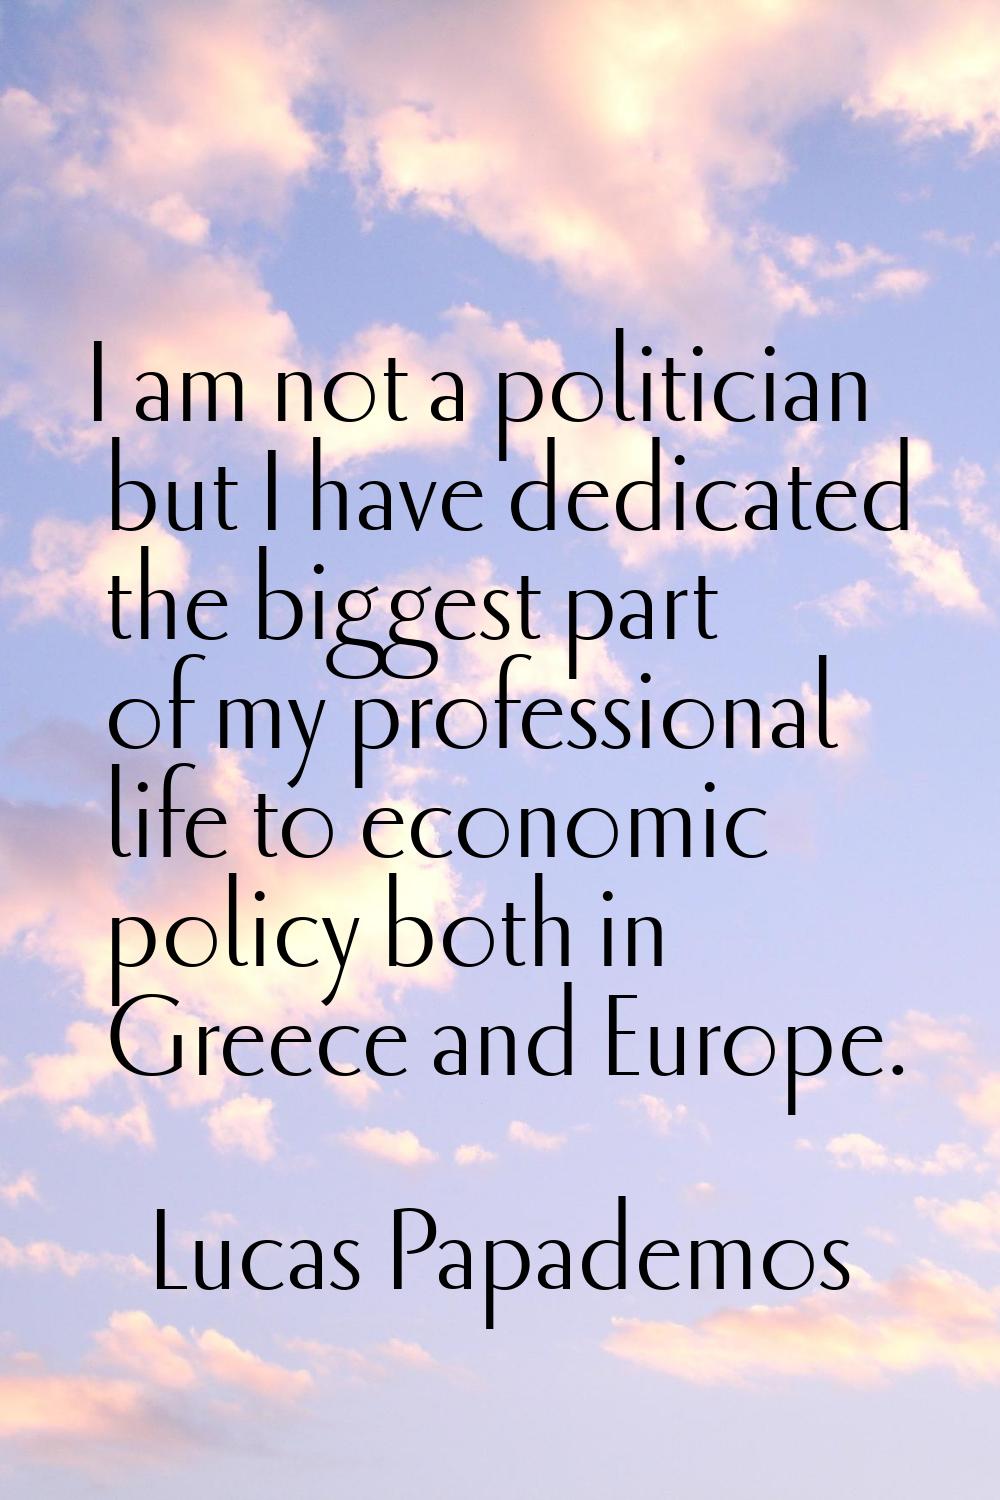 I am not a politician but I have dedicated the biggest part of my professional life to economic pol